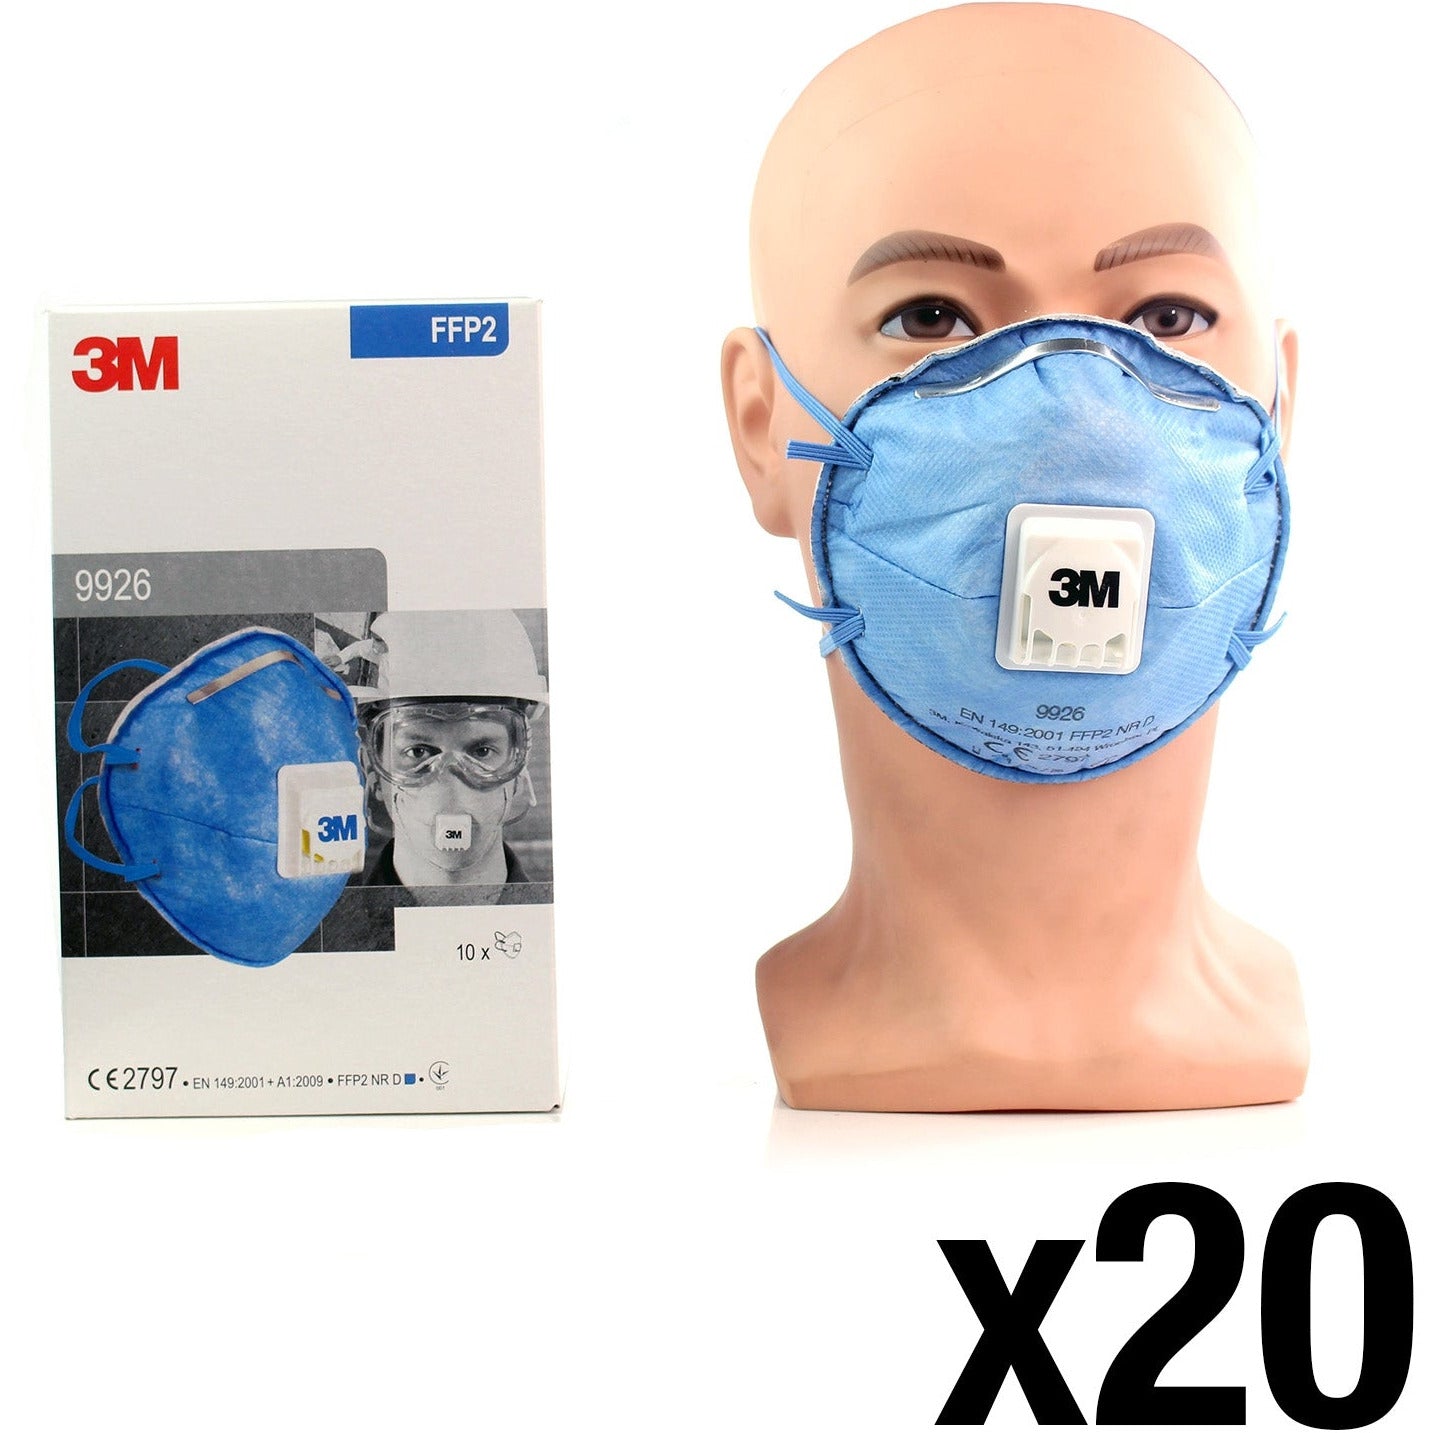 3M™ Particulate Respirator Face Mask FFP2 Valved - 9926 - Box of 10 - CLERANCE - Expiry 05/2024